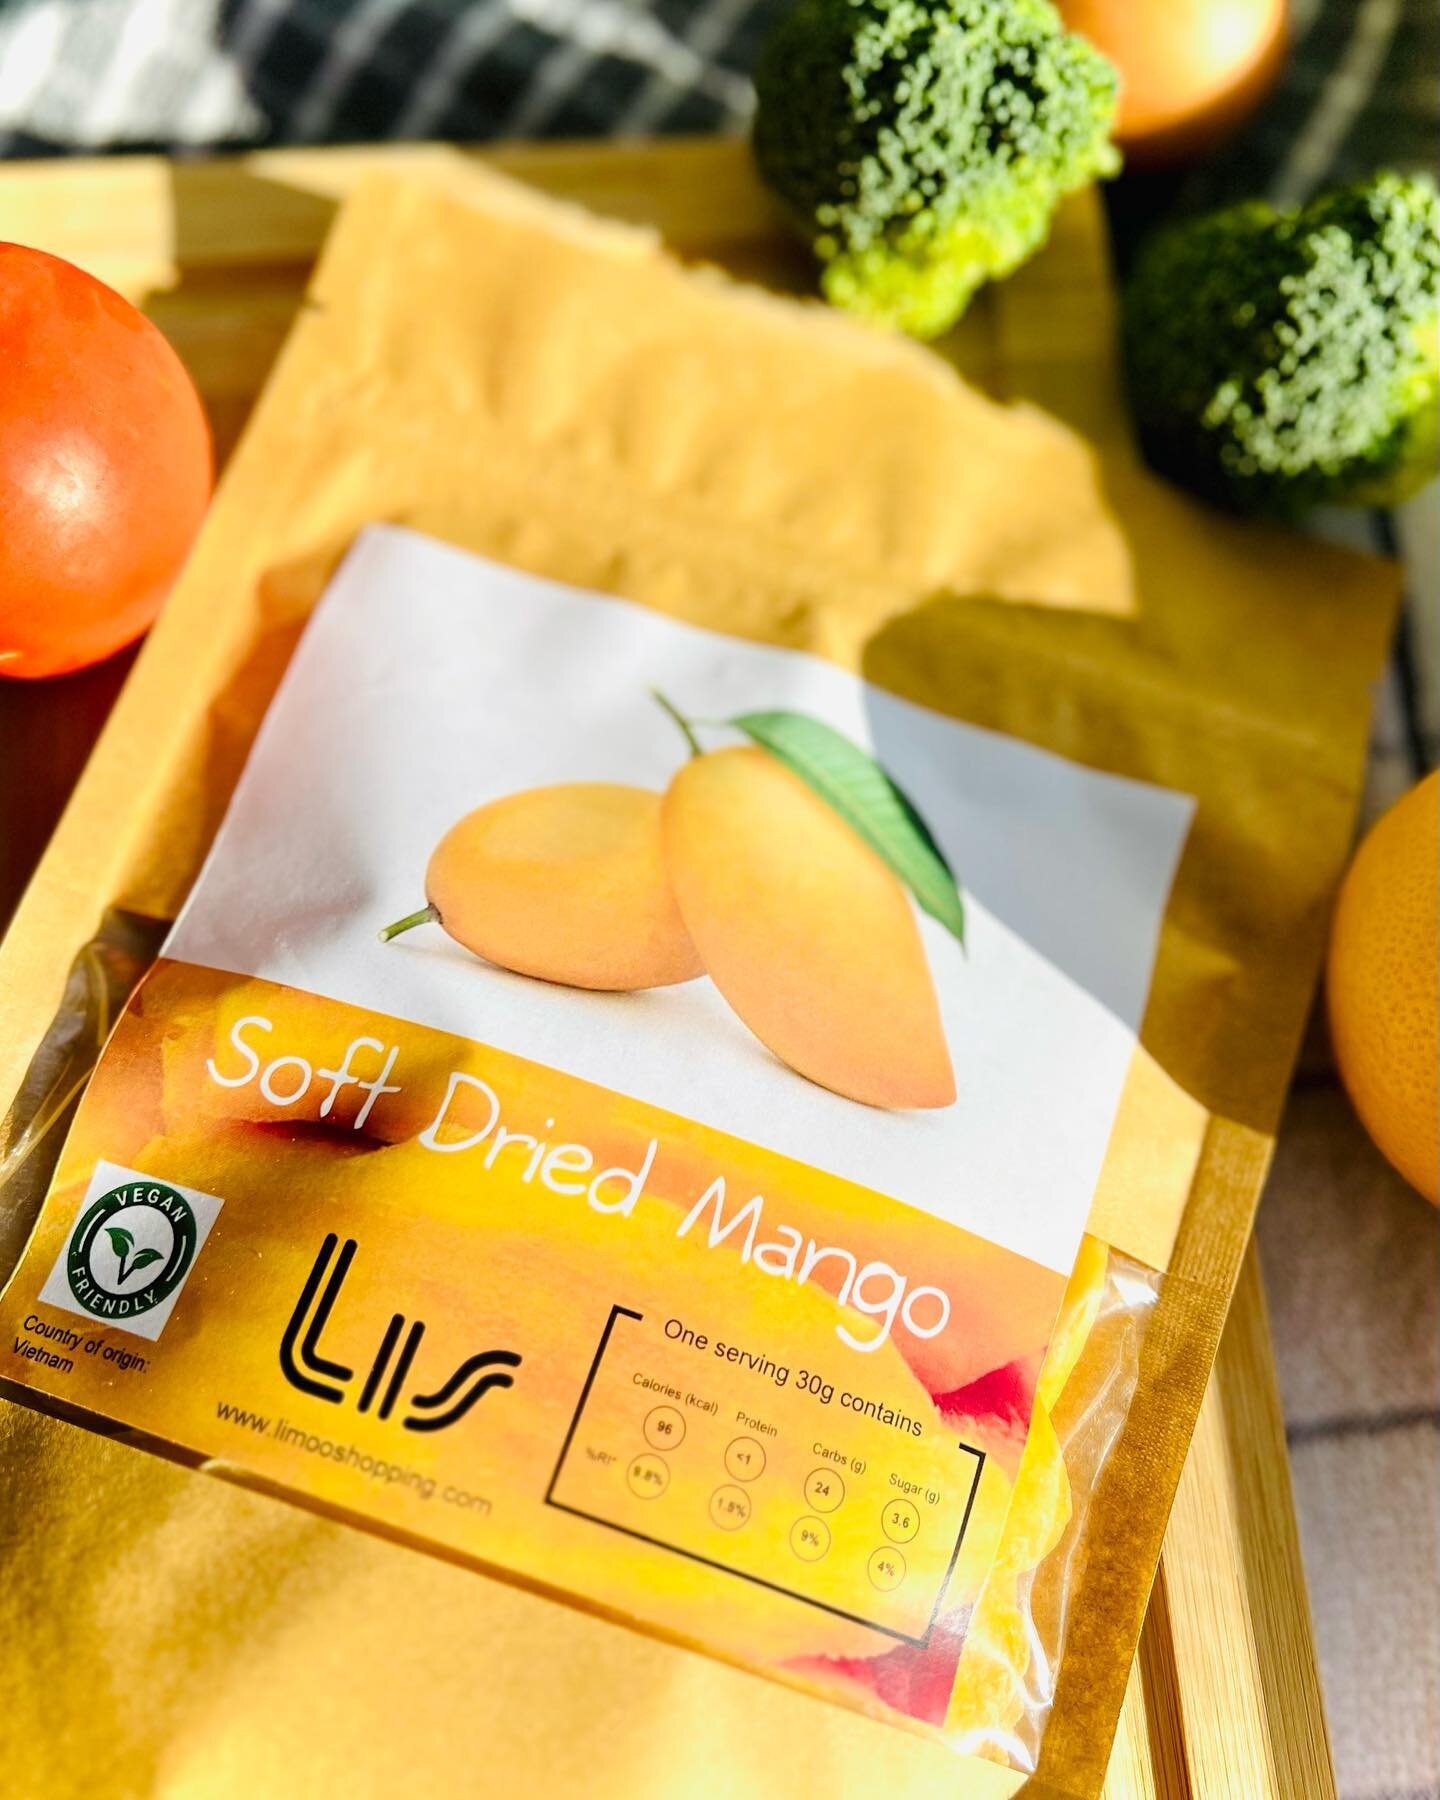 Introducing our delicious and juicy dried mango! Our mangoes are carefully selected and dried to perfection, ensuring that every bite is bursting with flavor. 

Our dried mangoes are the perfect snack for any time of day. Whether you're on-the-go, at